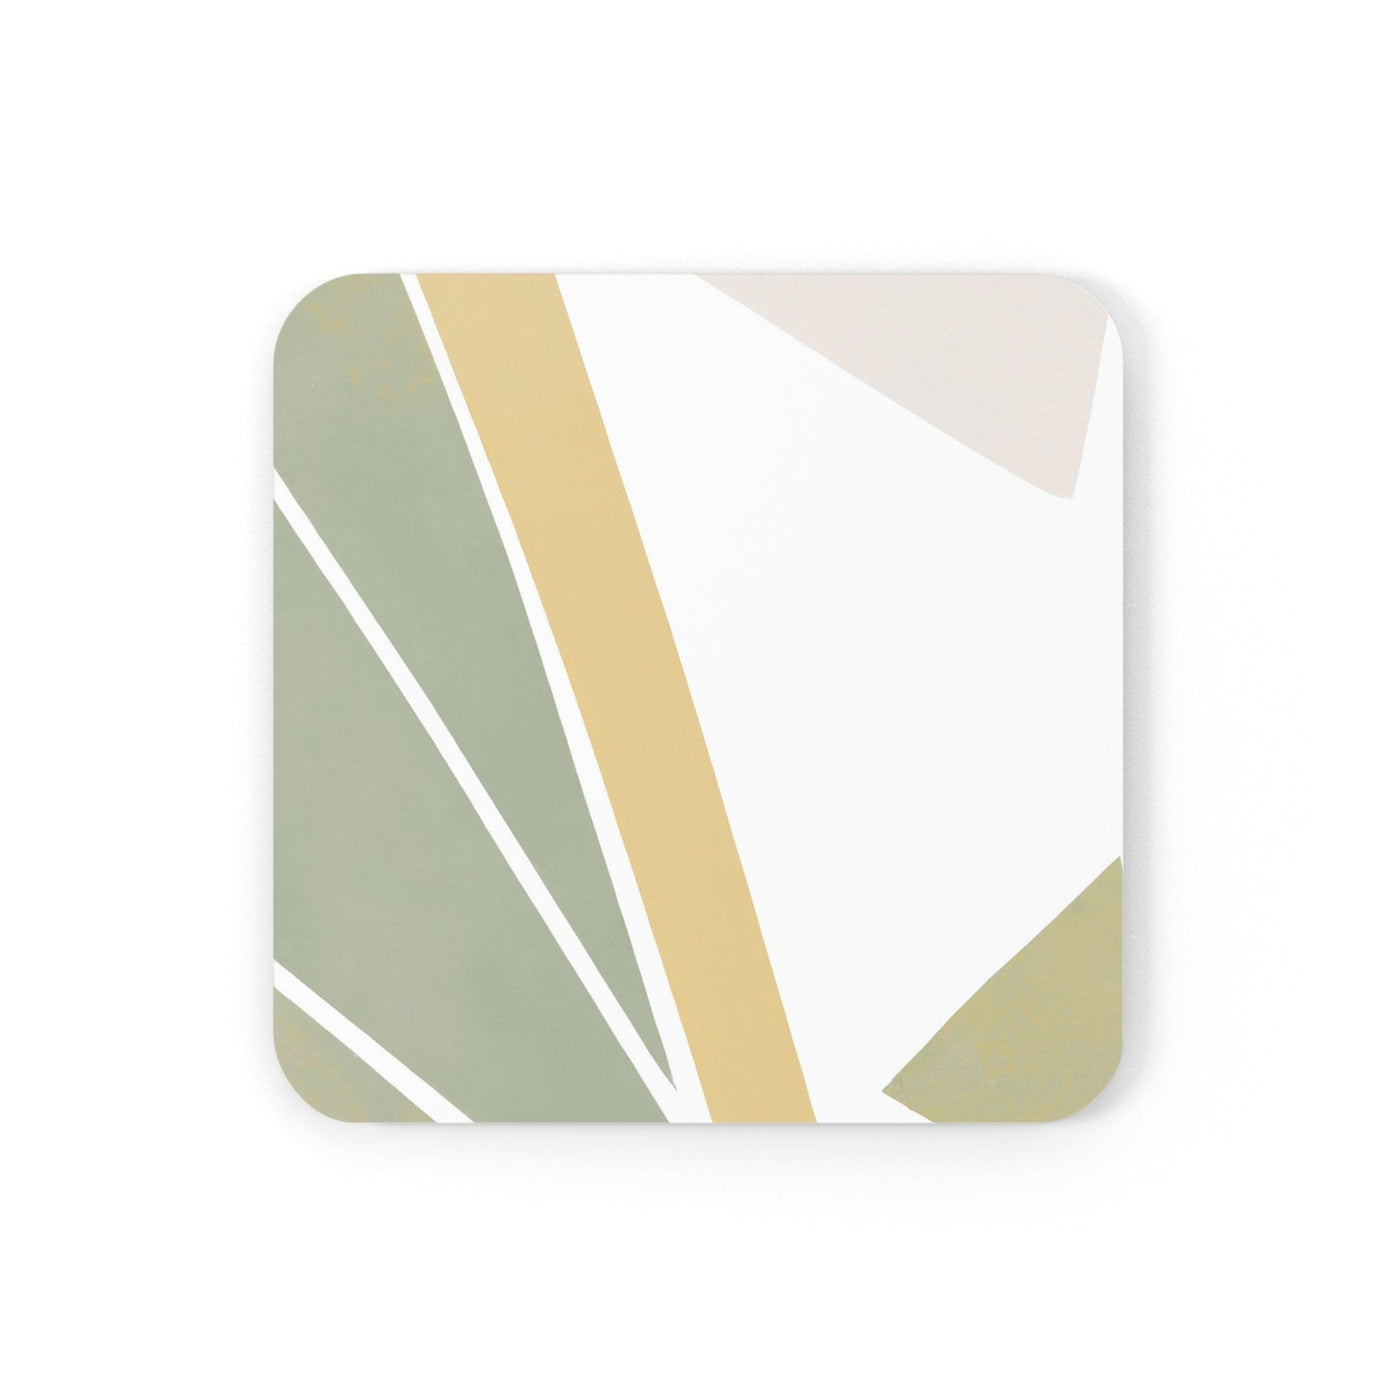 Handcrafted Square Coaster Set Of 4 For Drinks And Cups Green Abstract